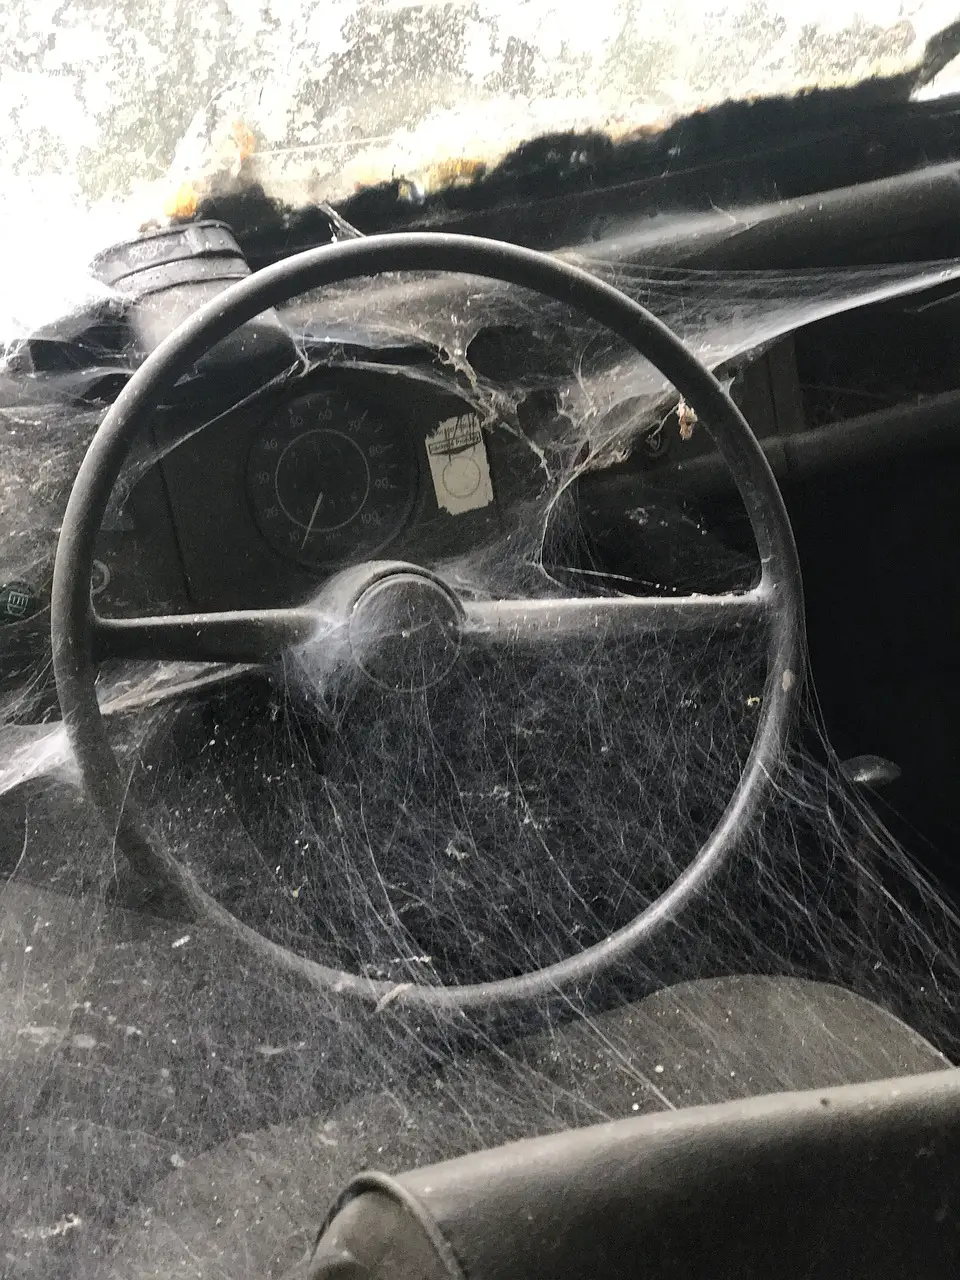 7 Tips to Help You Get a Spider out of Your Car